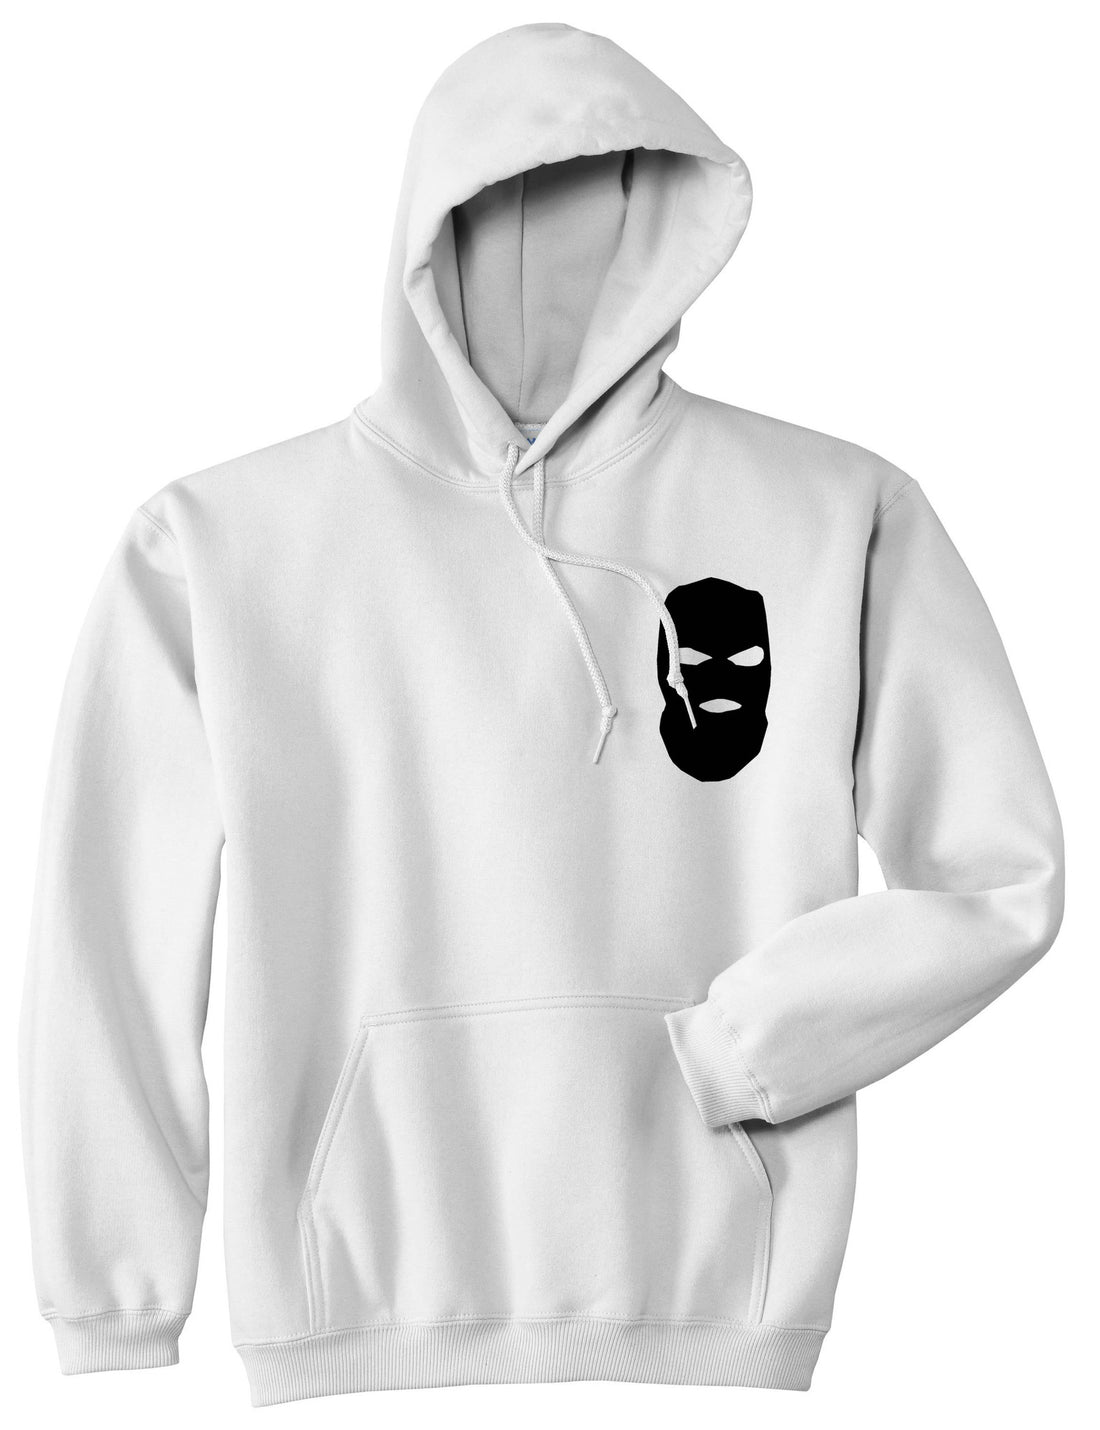 Ski Mask Way Robber Chest Logo Boys Kids Pullover Hoodie Hoody in White By Kings Of NY